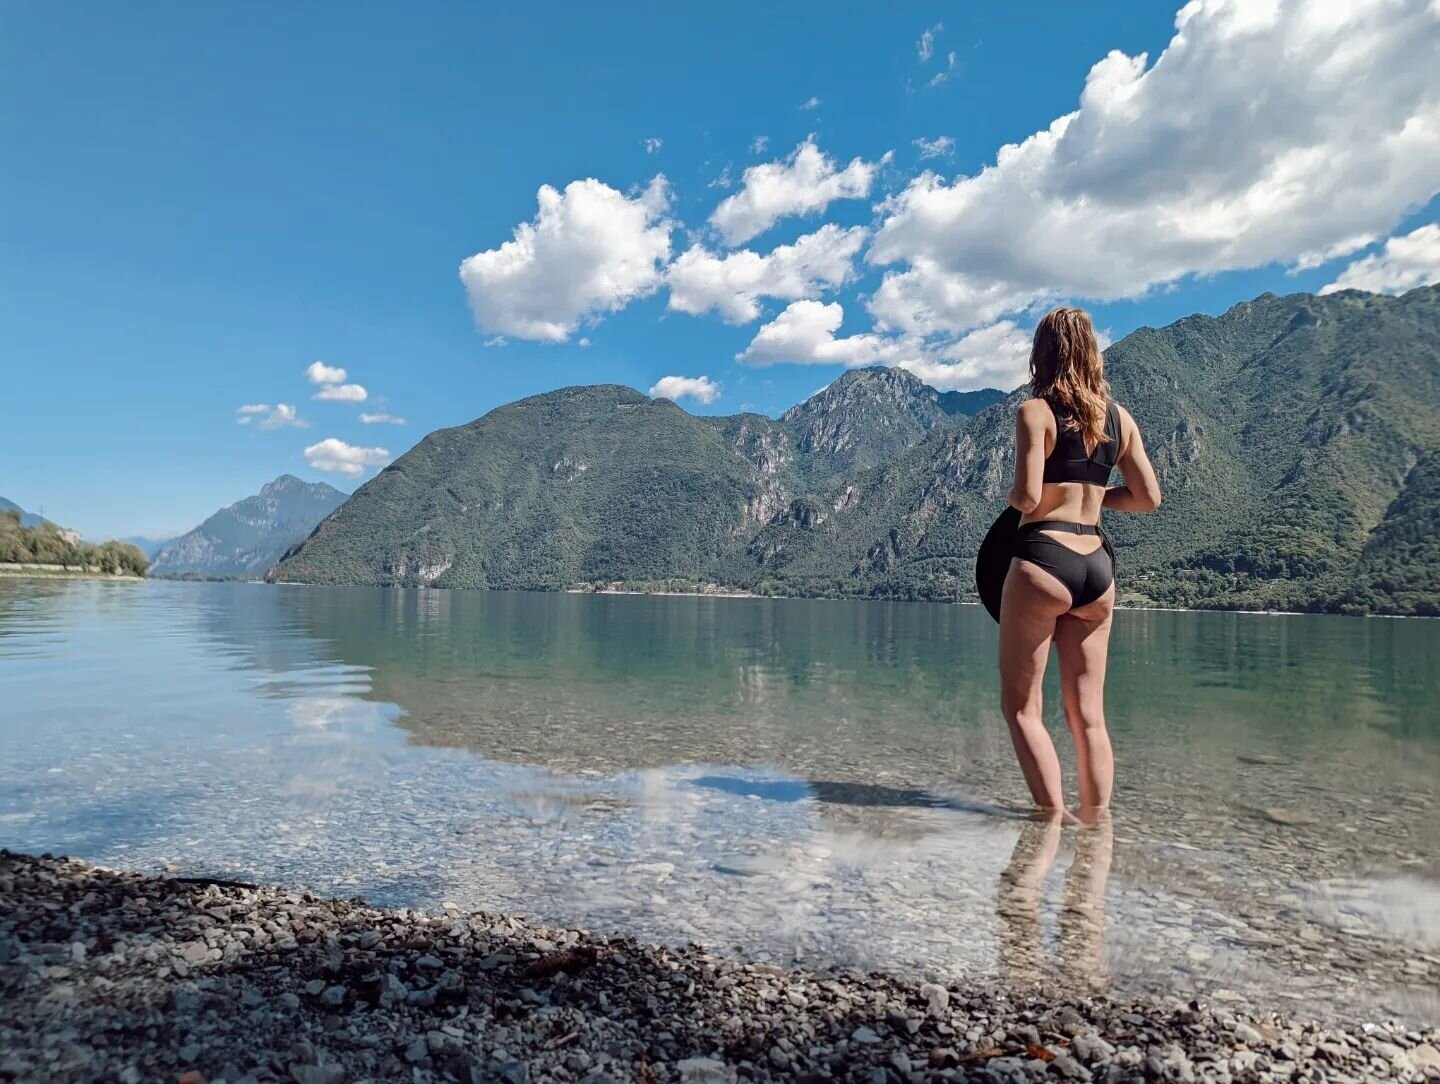 La fille d'idrO. 
(Alternative title: what happens when @defaggie reads the map wrong and drives to an entirely different lake 🤷&zwj;♀️)
.
.
.
#gardawho #dontknowher #allesgoedhier #ciao #paktdatwehierblijven #lakeview #italianlakes #vanlife #happya